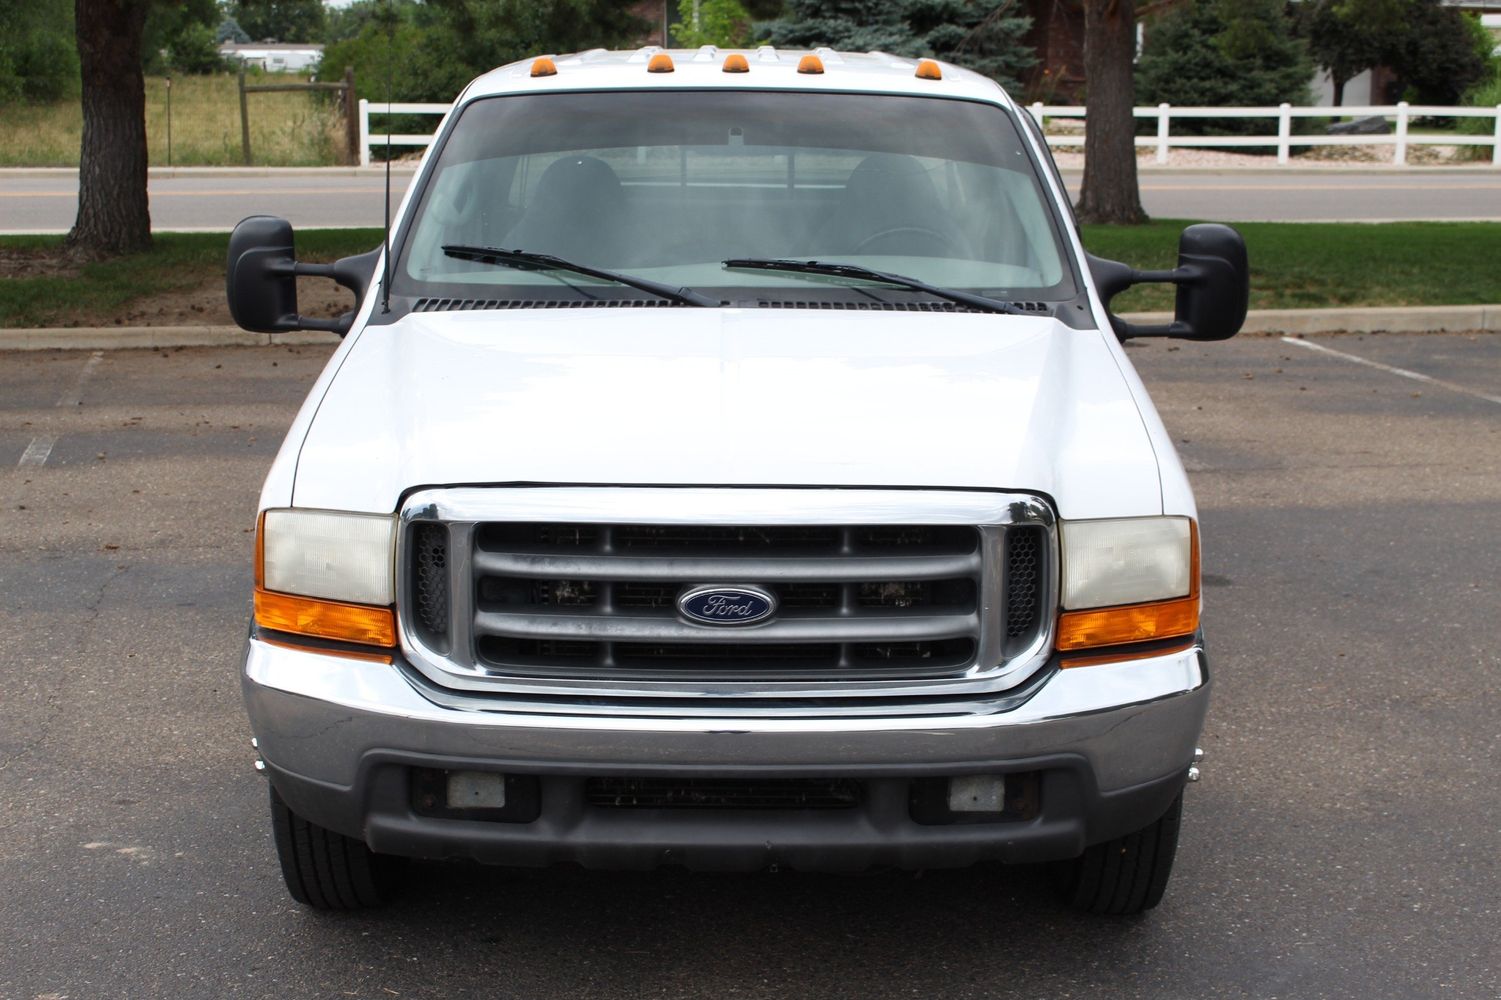 1999 Ford F-350 Super Duty XLT | Victory Motors of Colorado 1999 F350 Dually Rear End For Sale